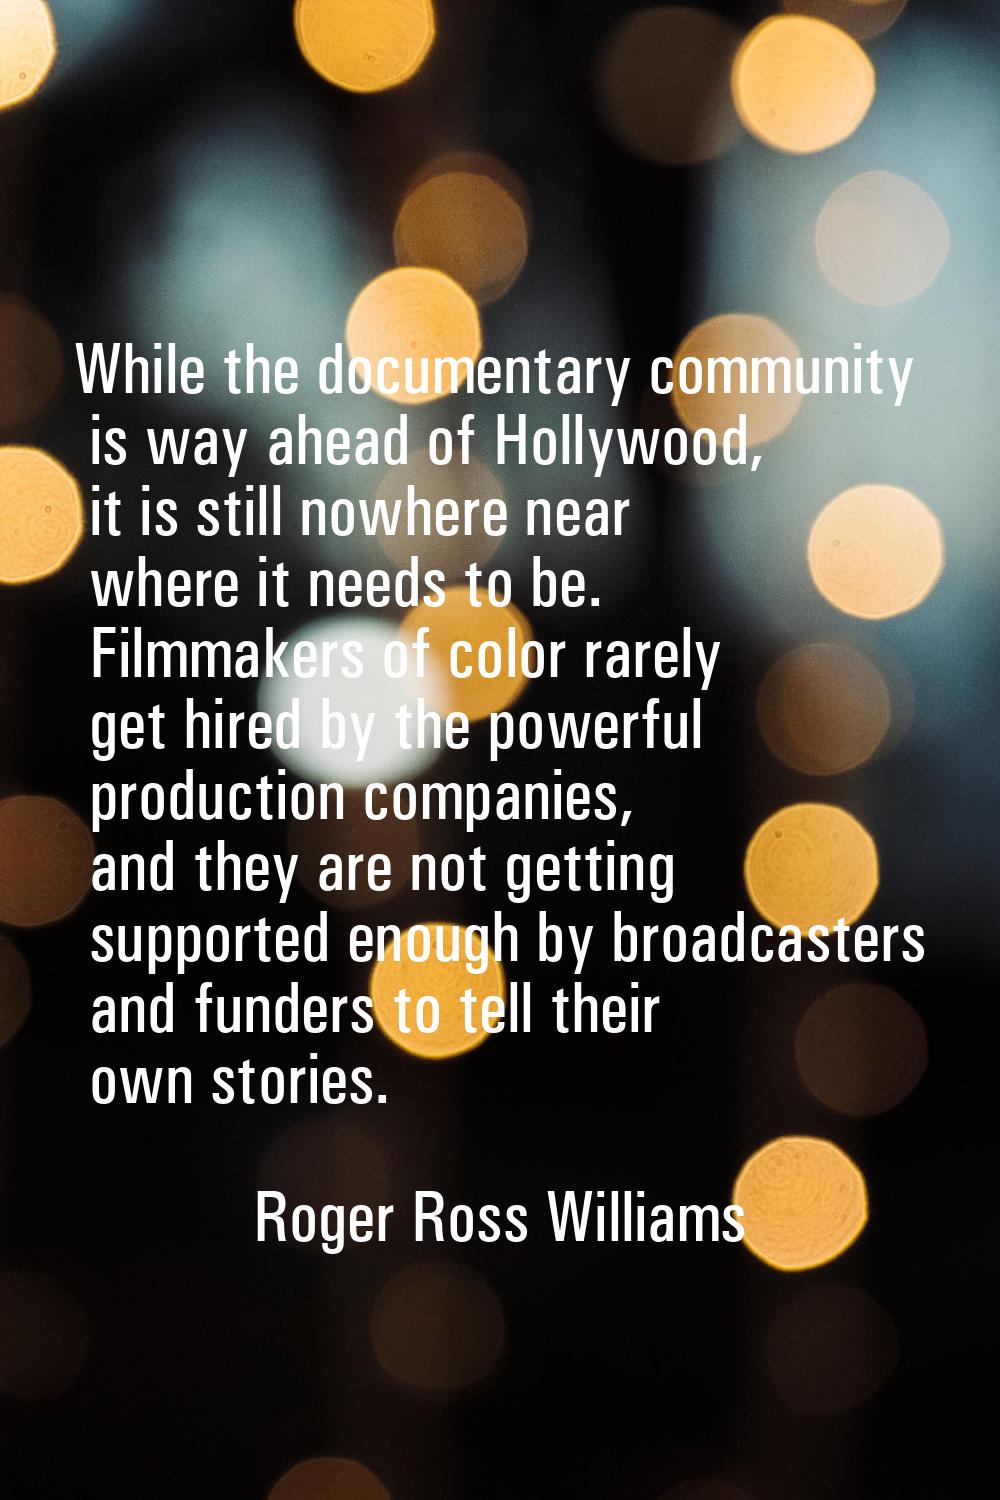 While the documentary community is way ahead of Hollywood, it is still nowhere near where it needs 